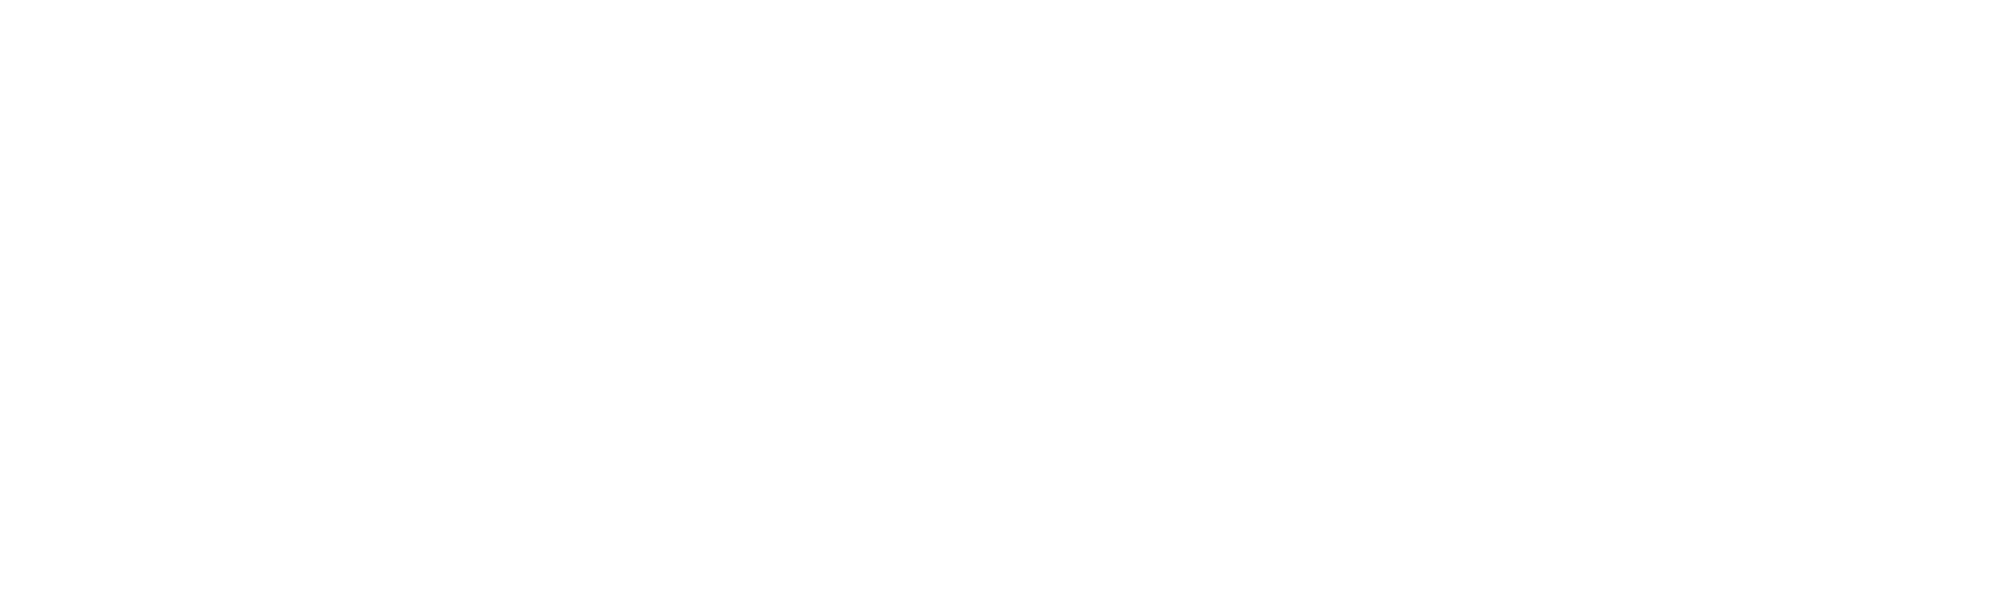 Campaign for the fordham law experience